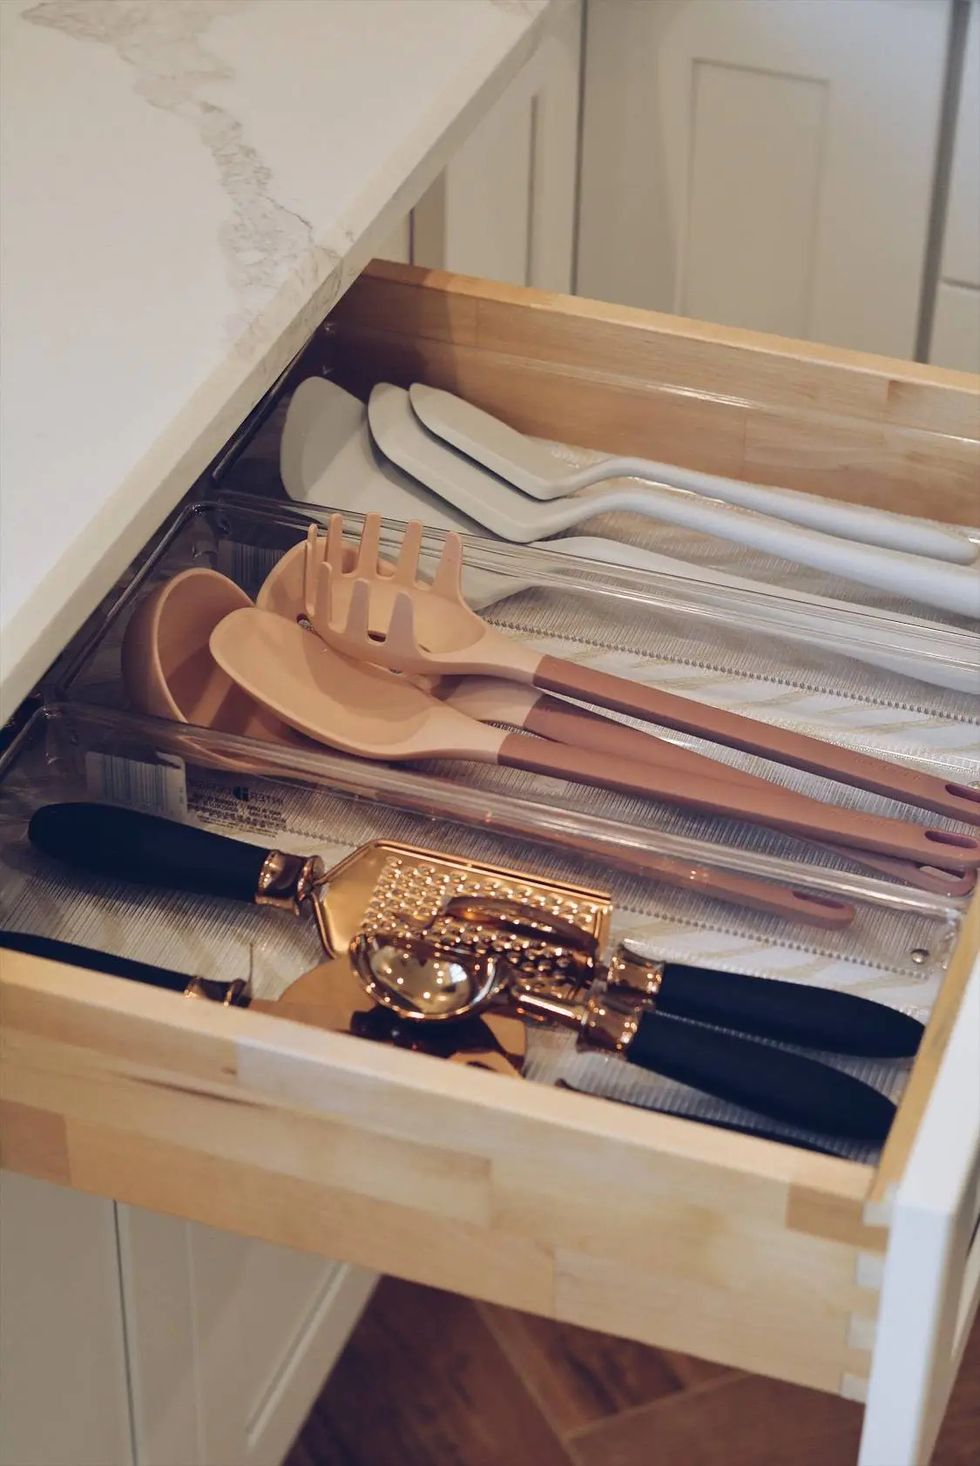 The Most Popular Kitchen Drawer Organizers You Can Get Right Now